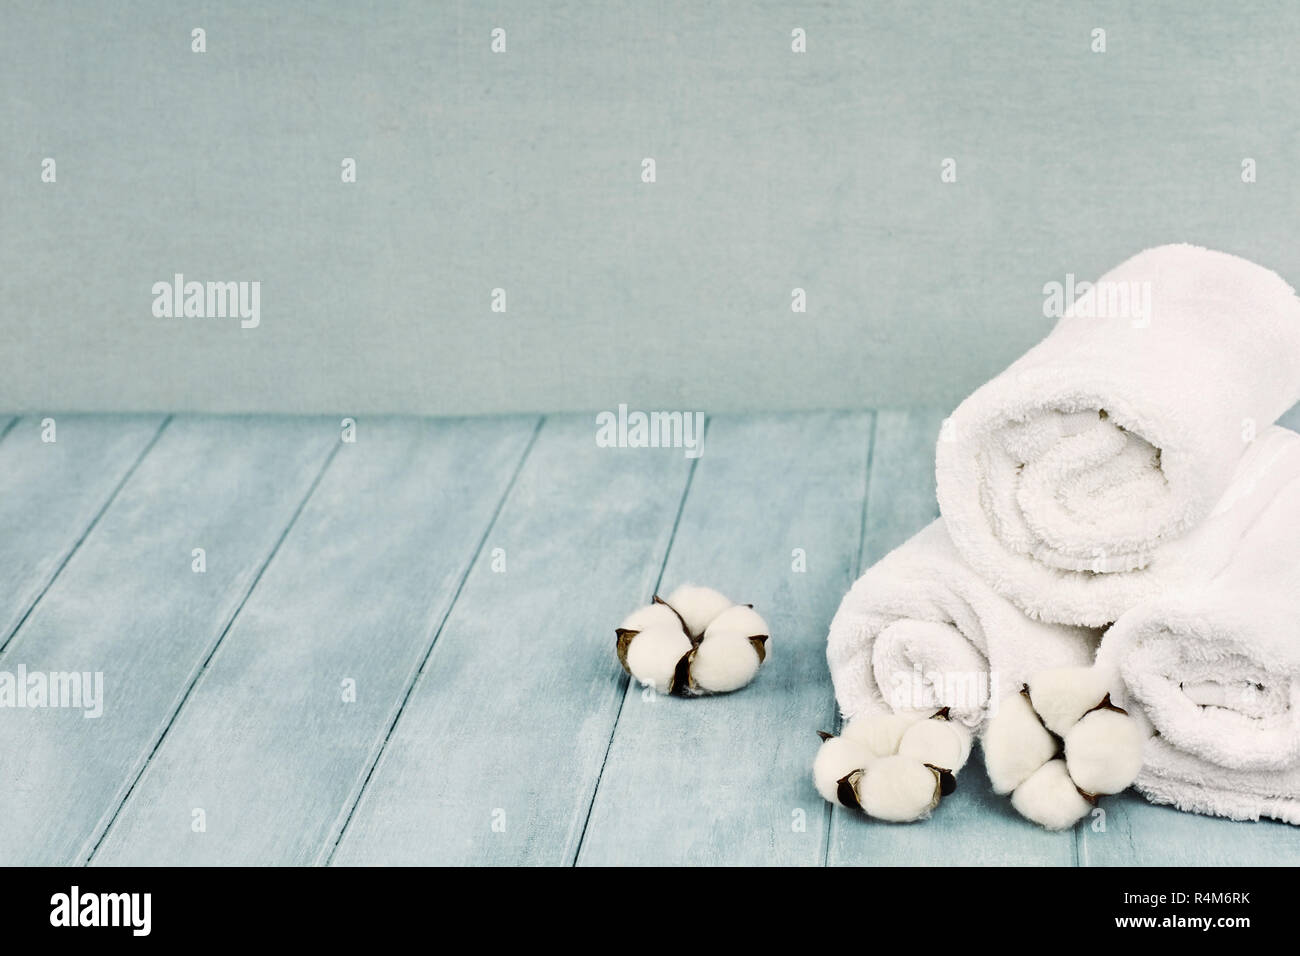 https://c8.alamy.com/comp/R4M6RK/rolled-up-white-fluffy-towels-with-cotton-flowers-against-a-blurred-blue-background-with-free-space-for-text-R4M6RK.jpg